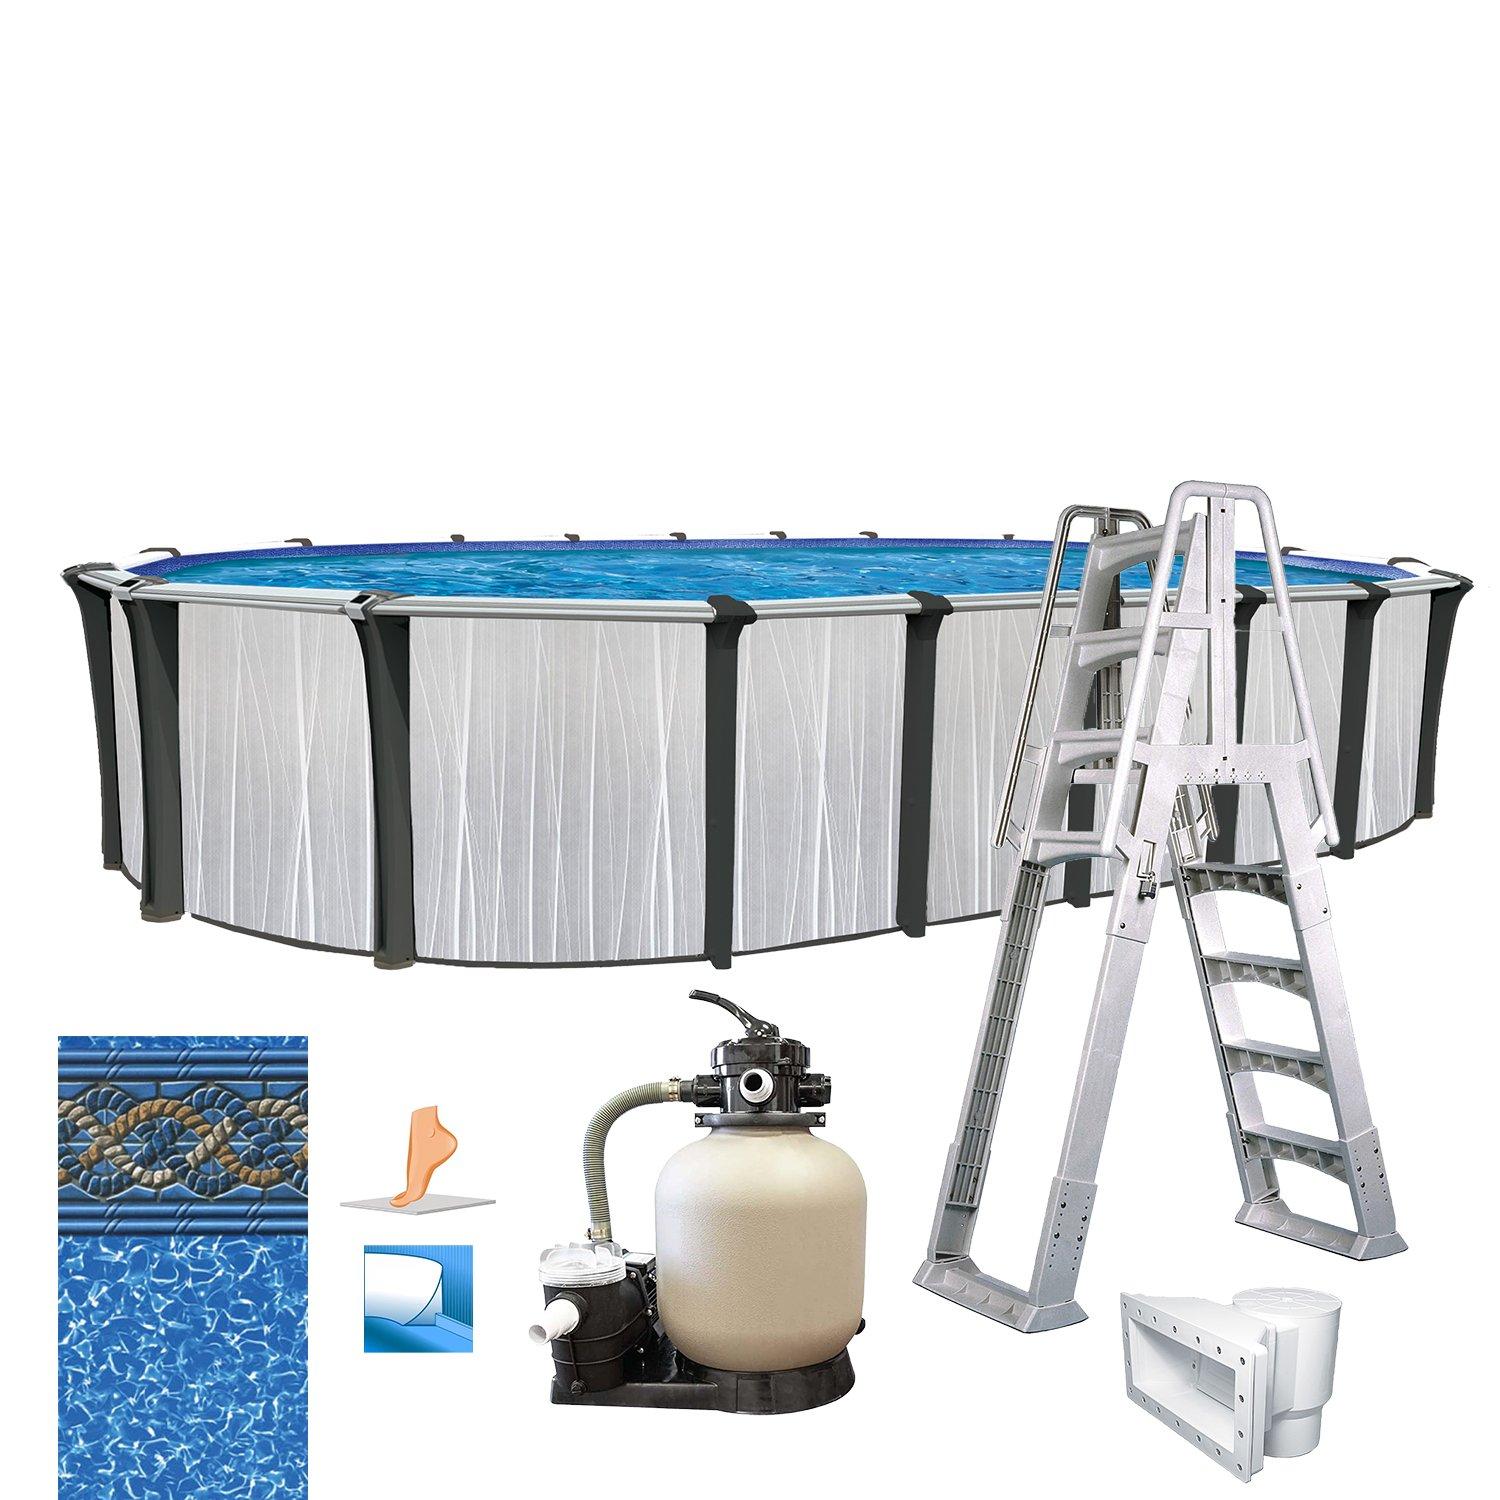 Athens 15'x31 x 52 Oval Above Ground Pool Package